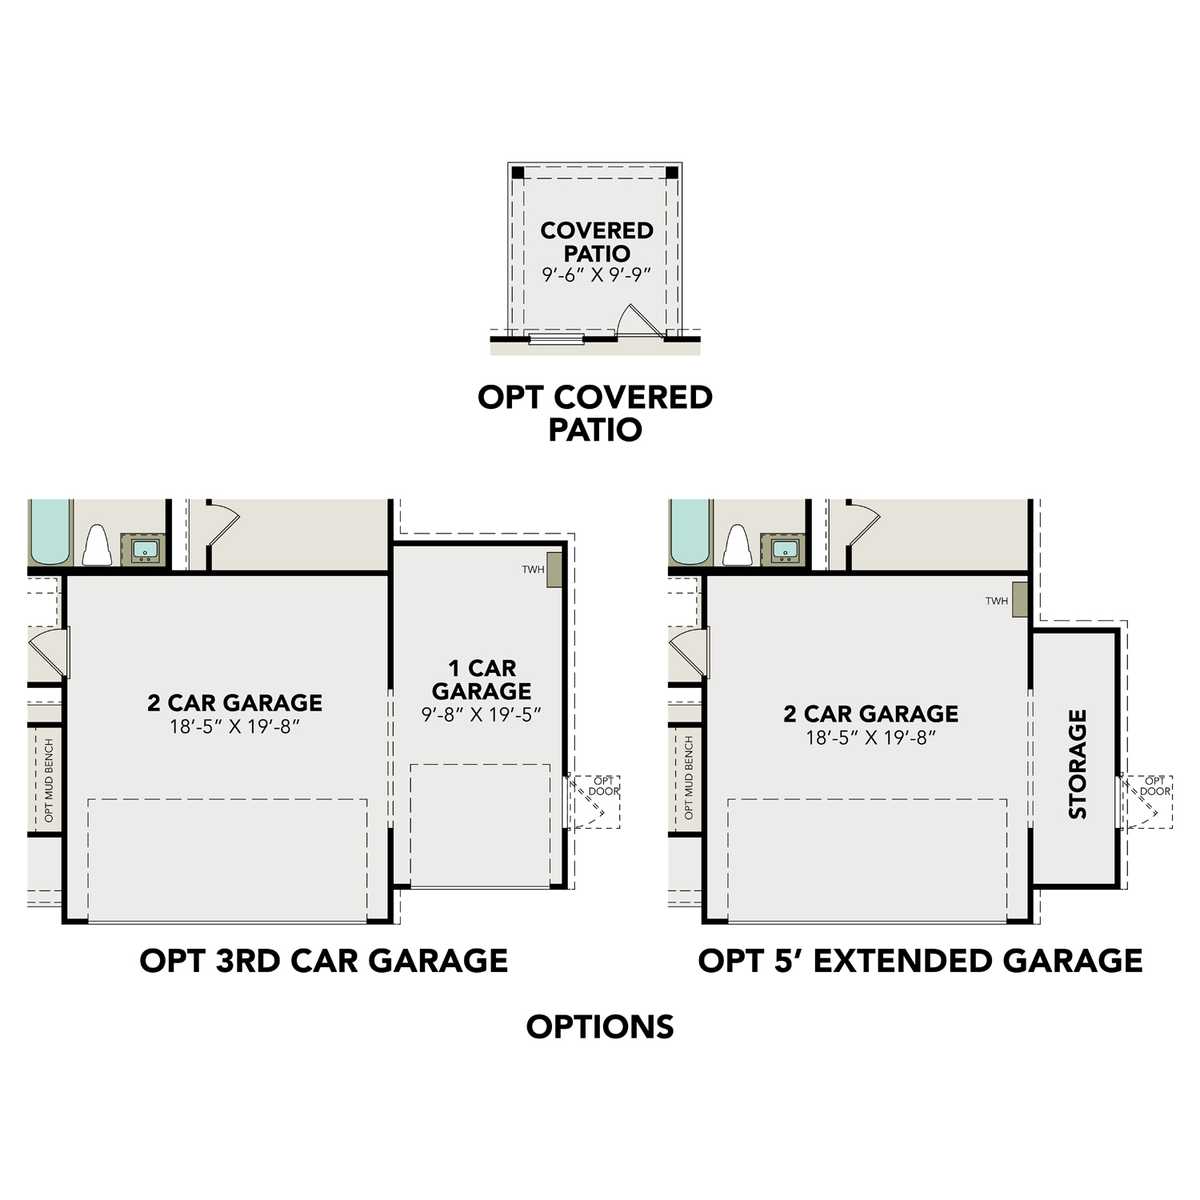 2 - The Frio F buildable floor plan layout in Davidson Homes' Caney Creek Place community.